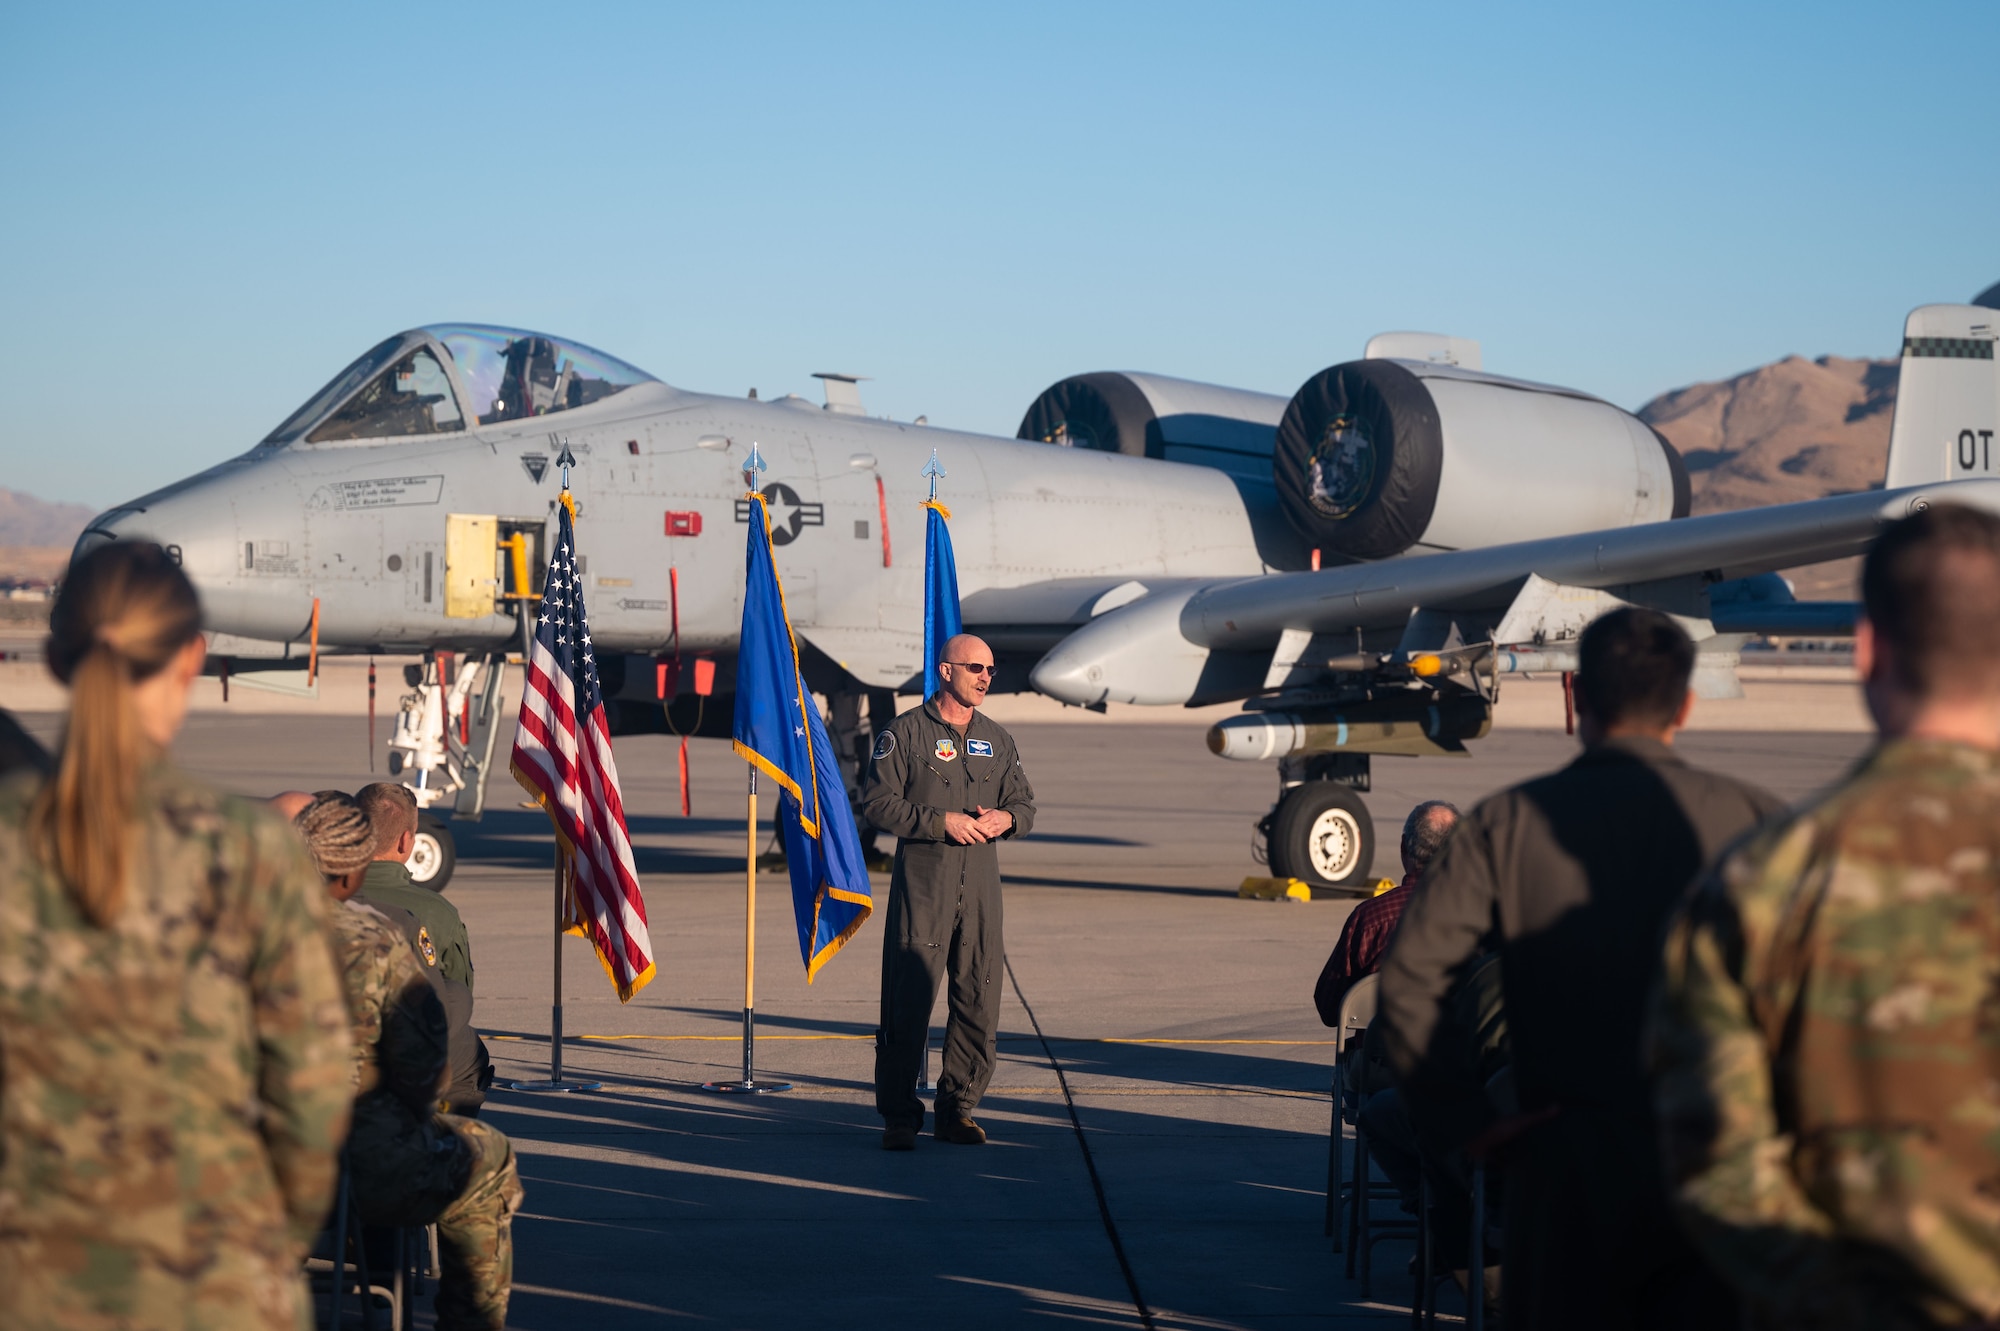 U.S. Air Force Major Kyle Adkison, A-10 Pilot assigned to the 53rd Wing is presented the Distinguished Flying Cross with Combat Service by U.S. Air Force Major General R. Scott Jobe, Director of Plans, Programs, and Requirements, Headquarters Air Combat Command, during a ceremony at Nellis Air Force Base, Nevada, Nov. 22, 2022. The distinguished flying cross is awarded for heroism or extraordinary achievement while participating in aerial flight. Both heroism and achievement must be entirely distinctive, involving operations that are not routine.